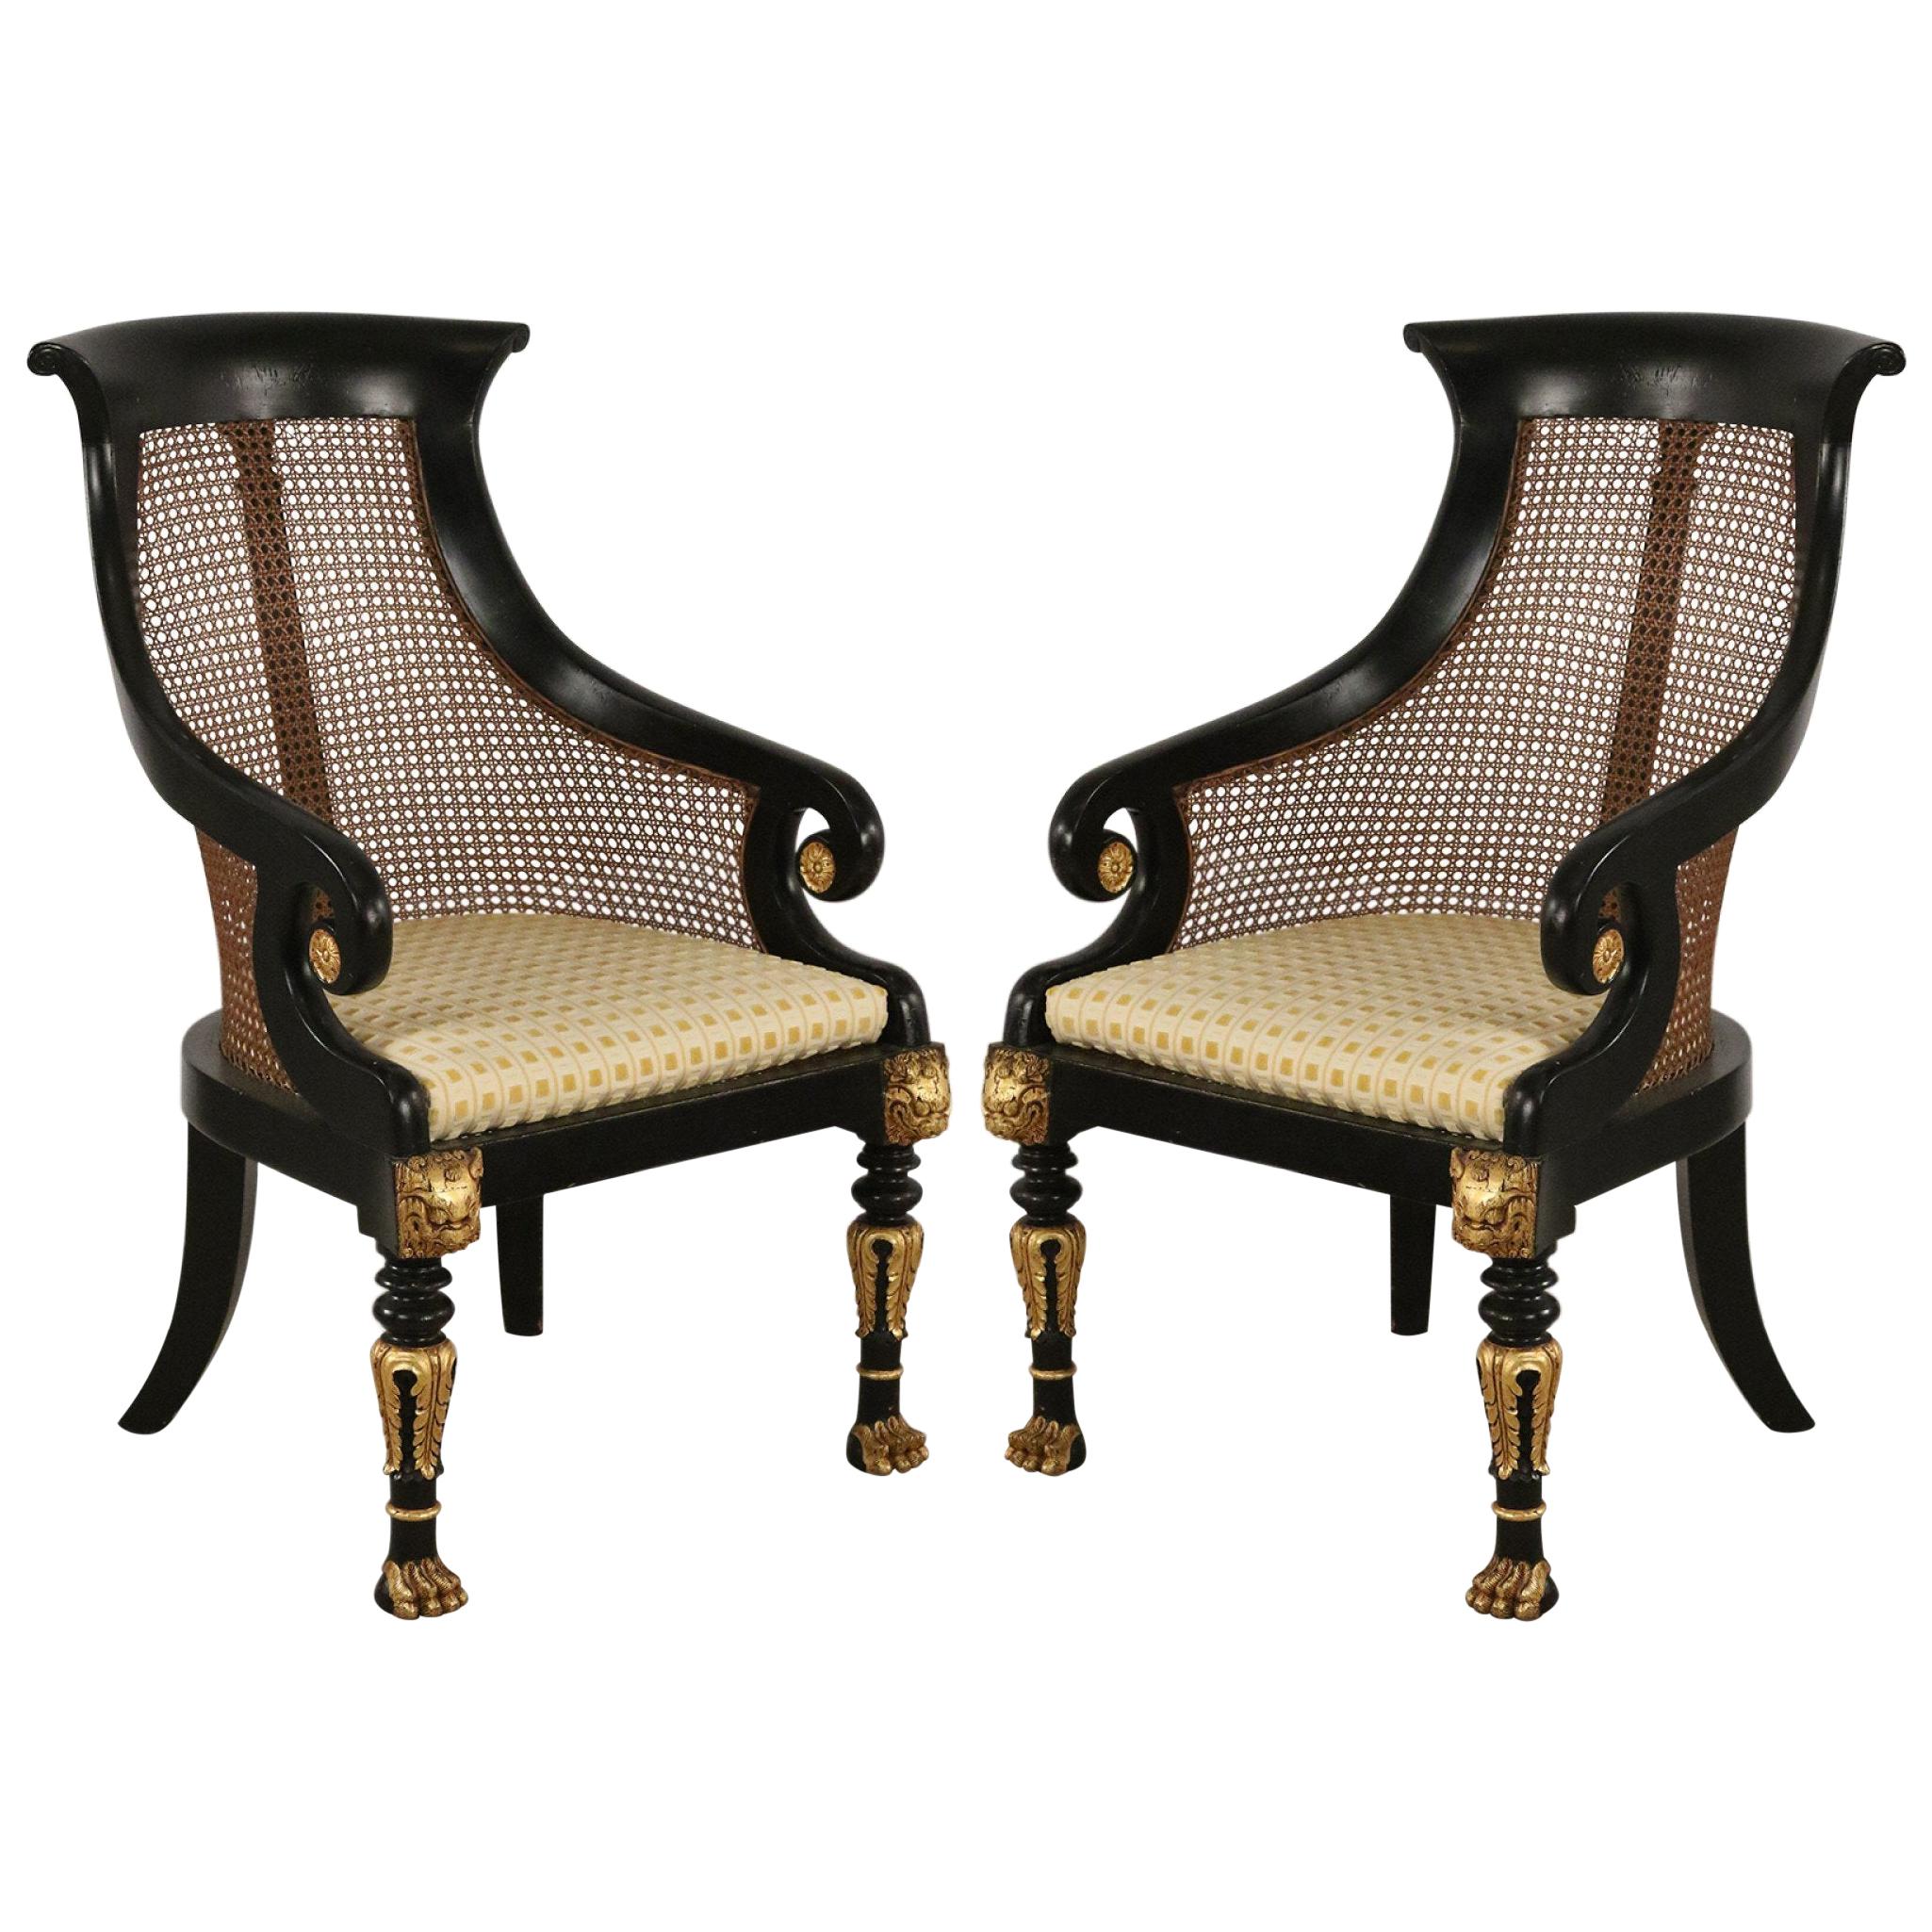 Pair of English Regency Style Carved Black and Gilt Cane Back Armchairs